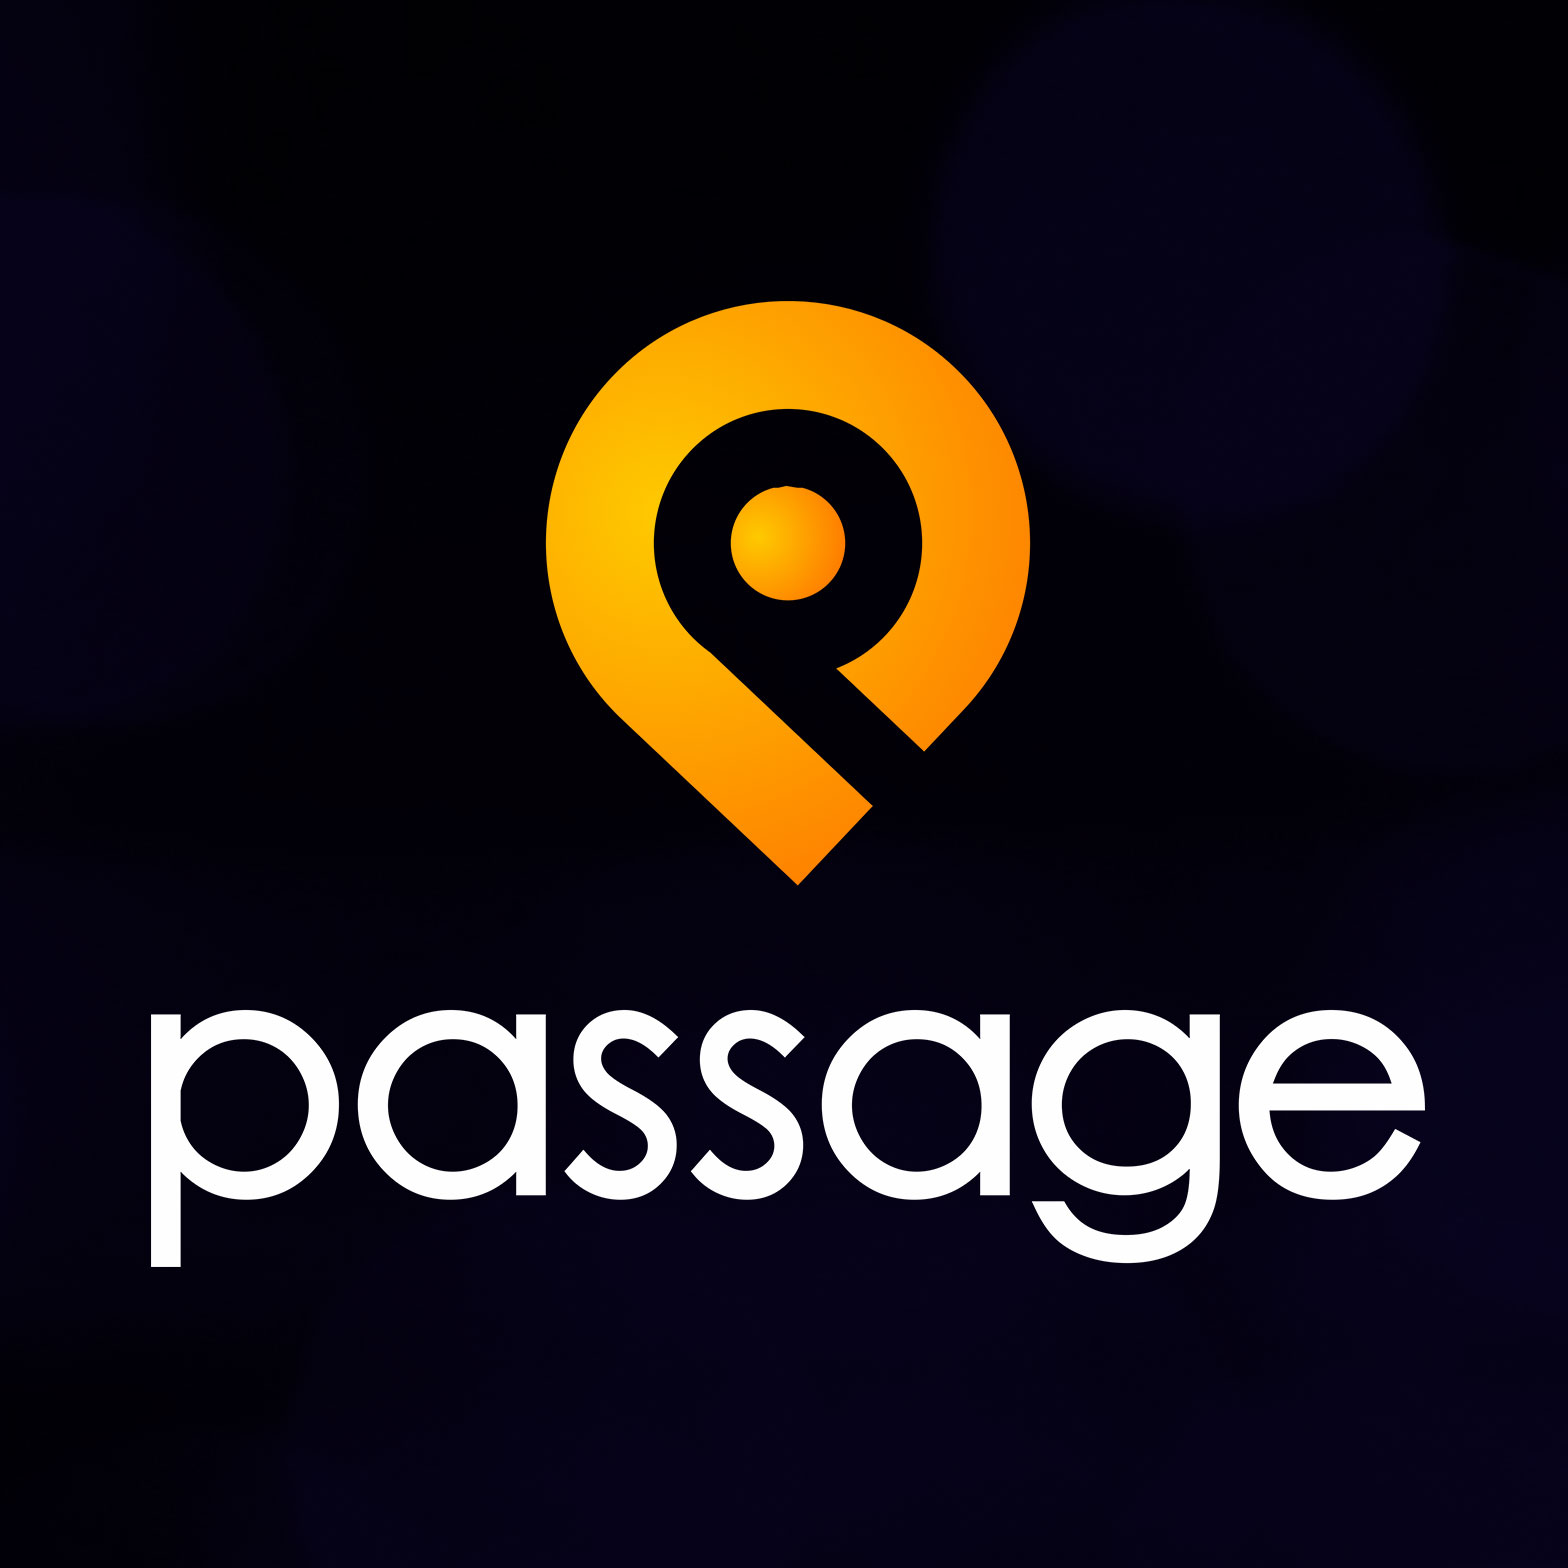 Passage - Your event. Your fans. Your mobile box office.